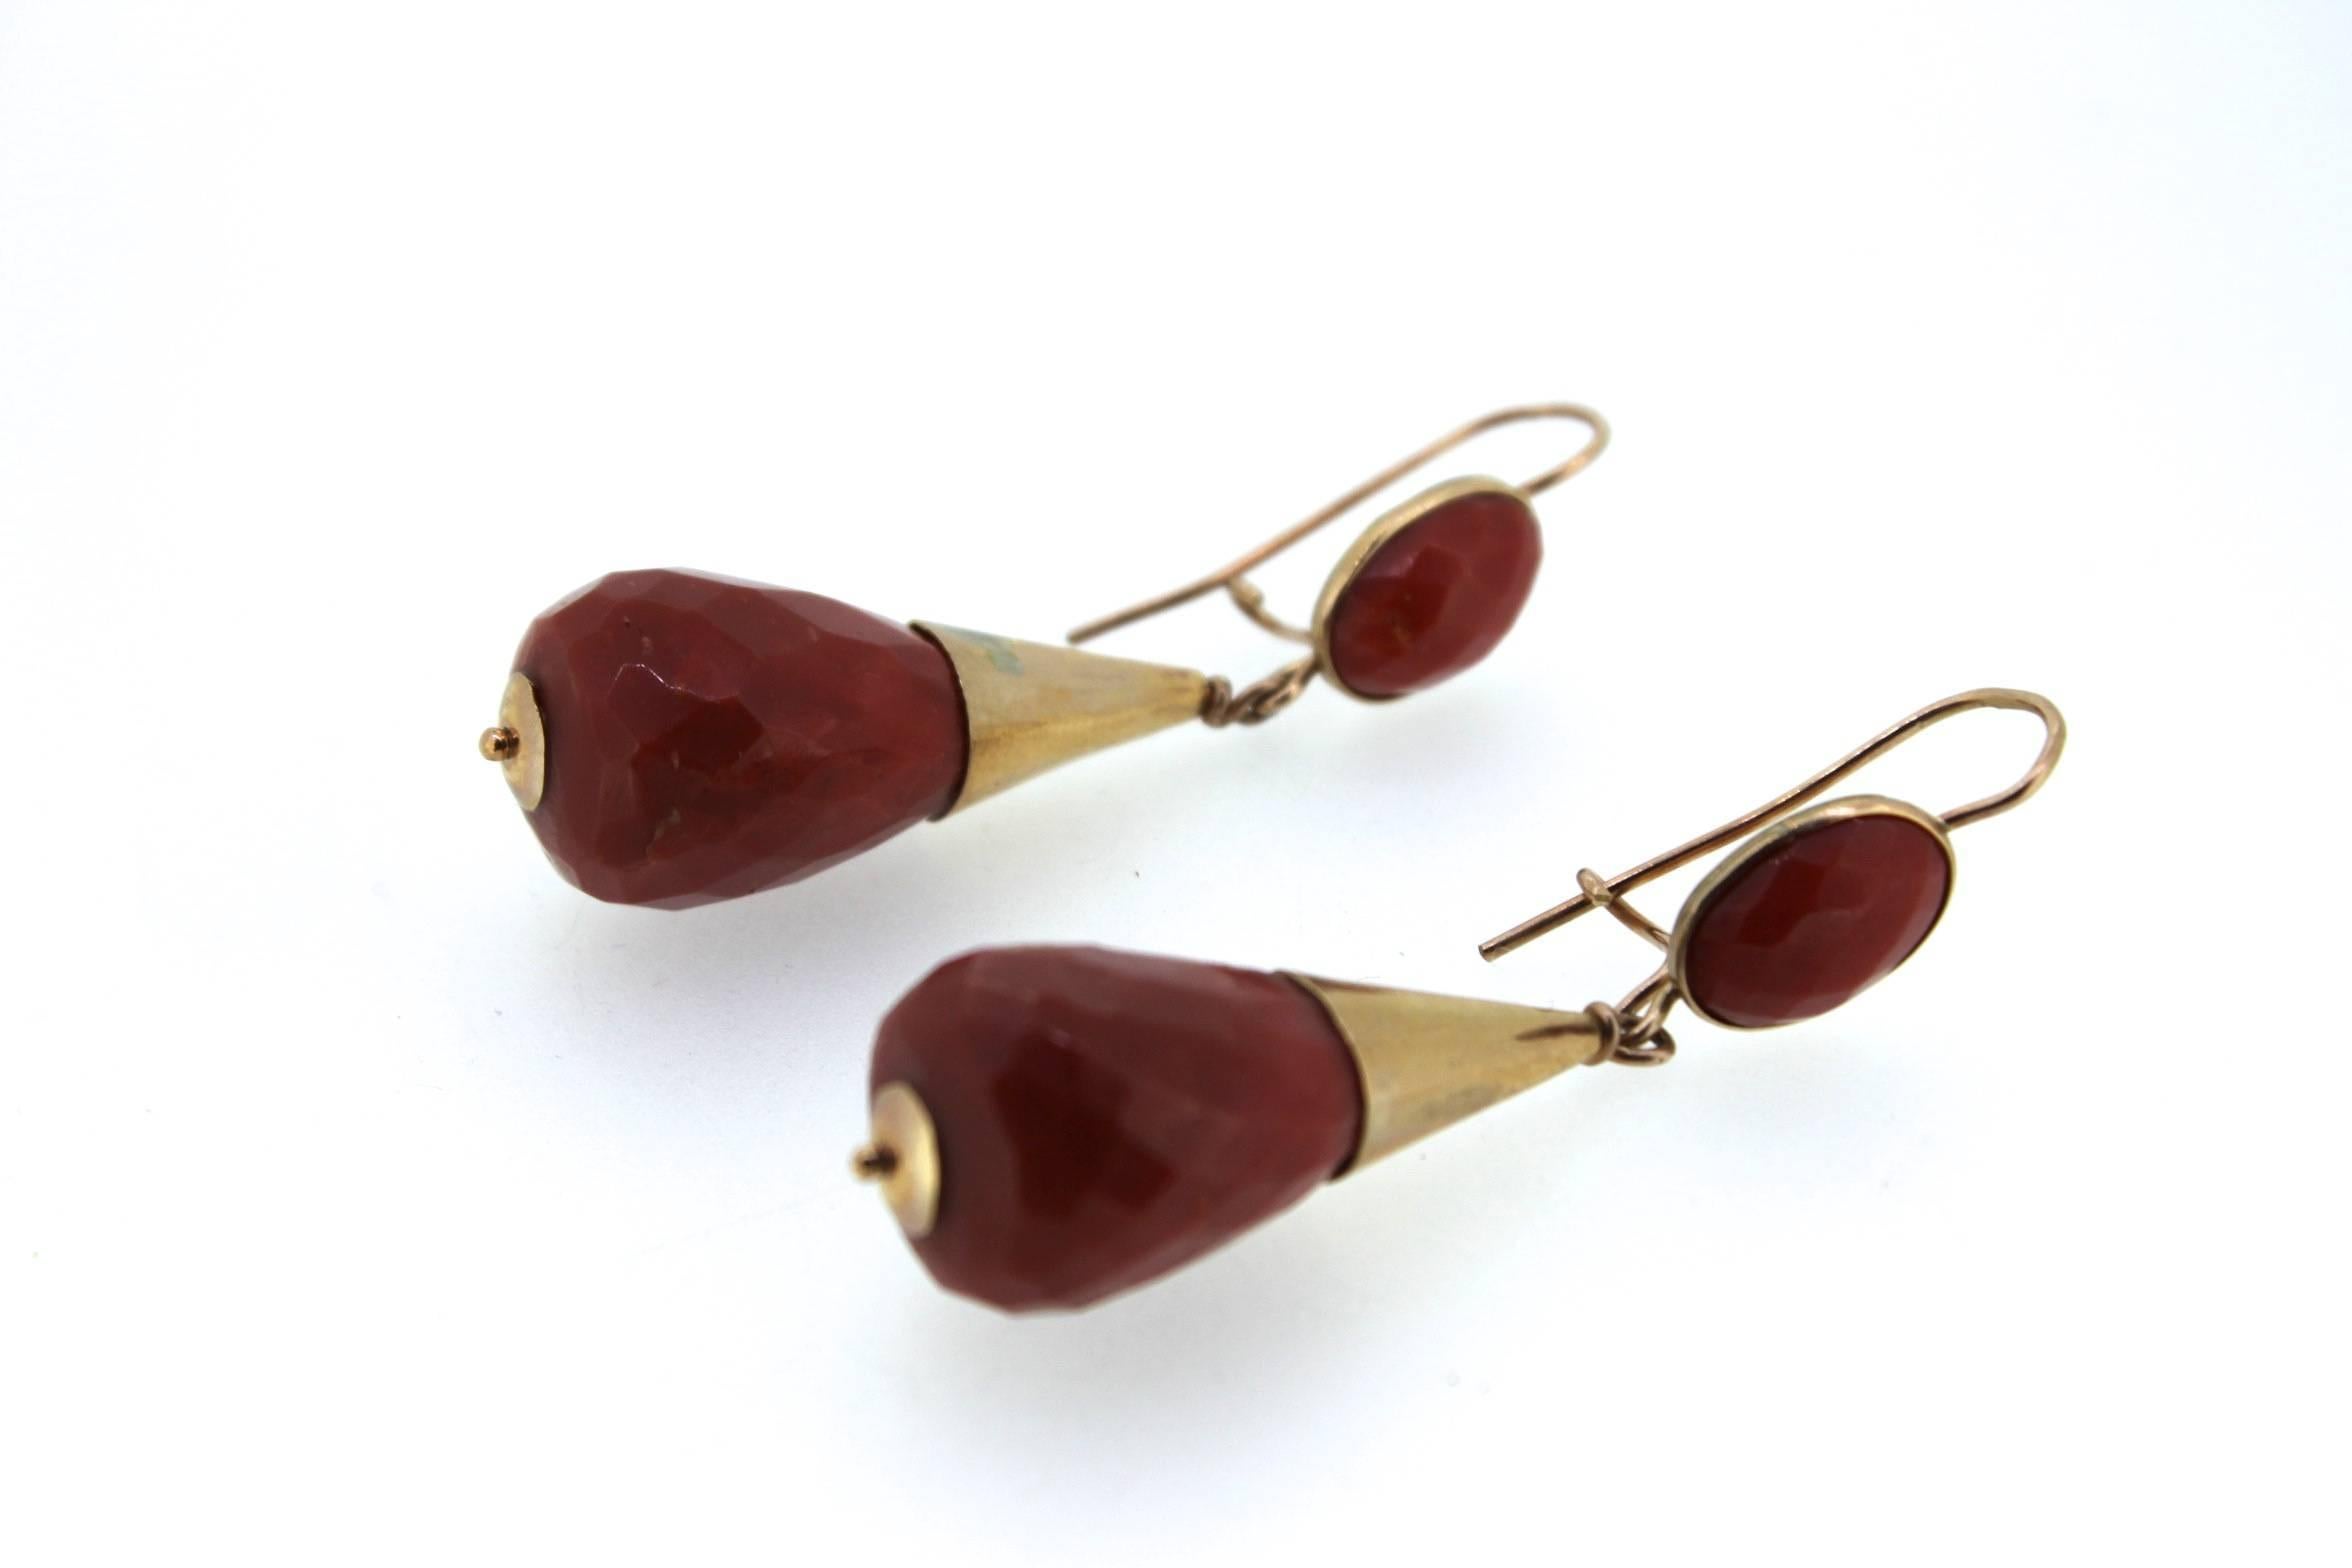 We are offering these beautiful natural red coral earrings.

The natural coral earrings come from the mediterranean coast of Italy known for there deep red coral. The earring are made of 9K gold, and the natural red coral has been faceted so that